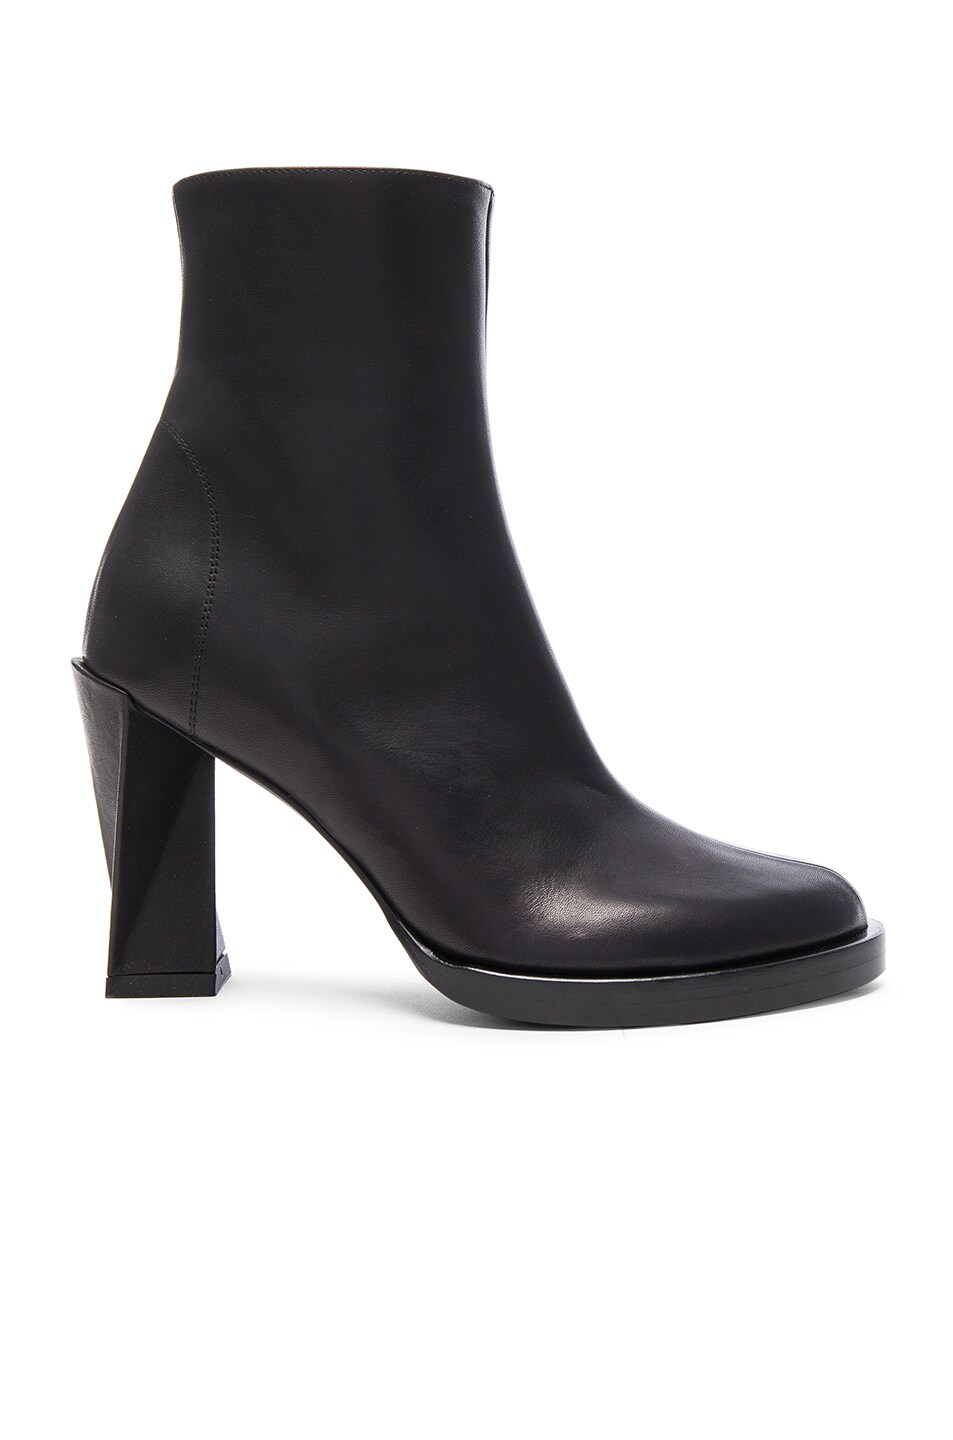 Image 1 of Ann Demeulemeester Leather Twist Heel Boots in Black